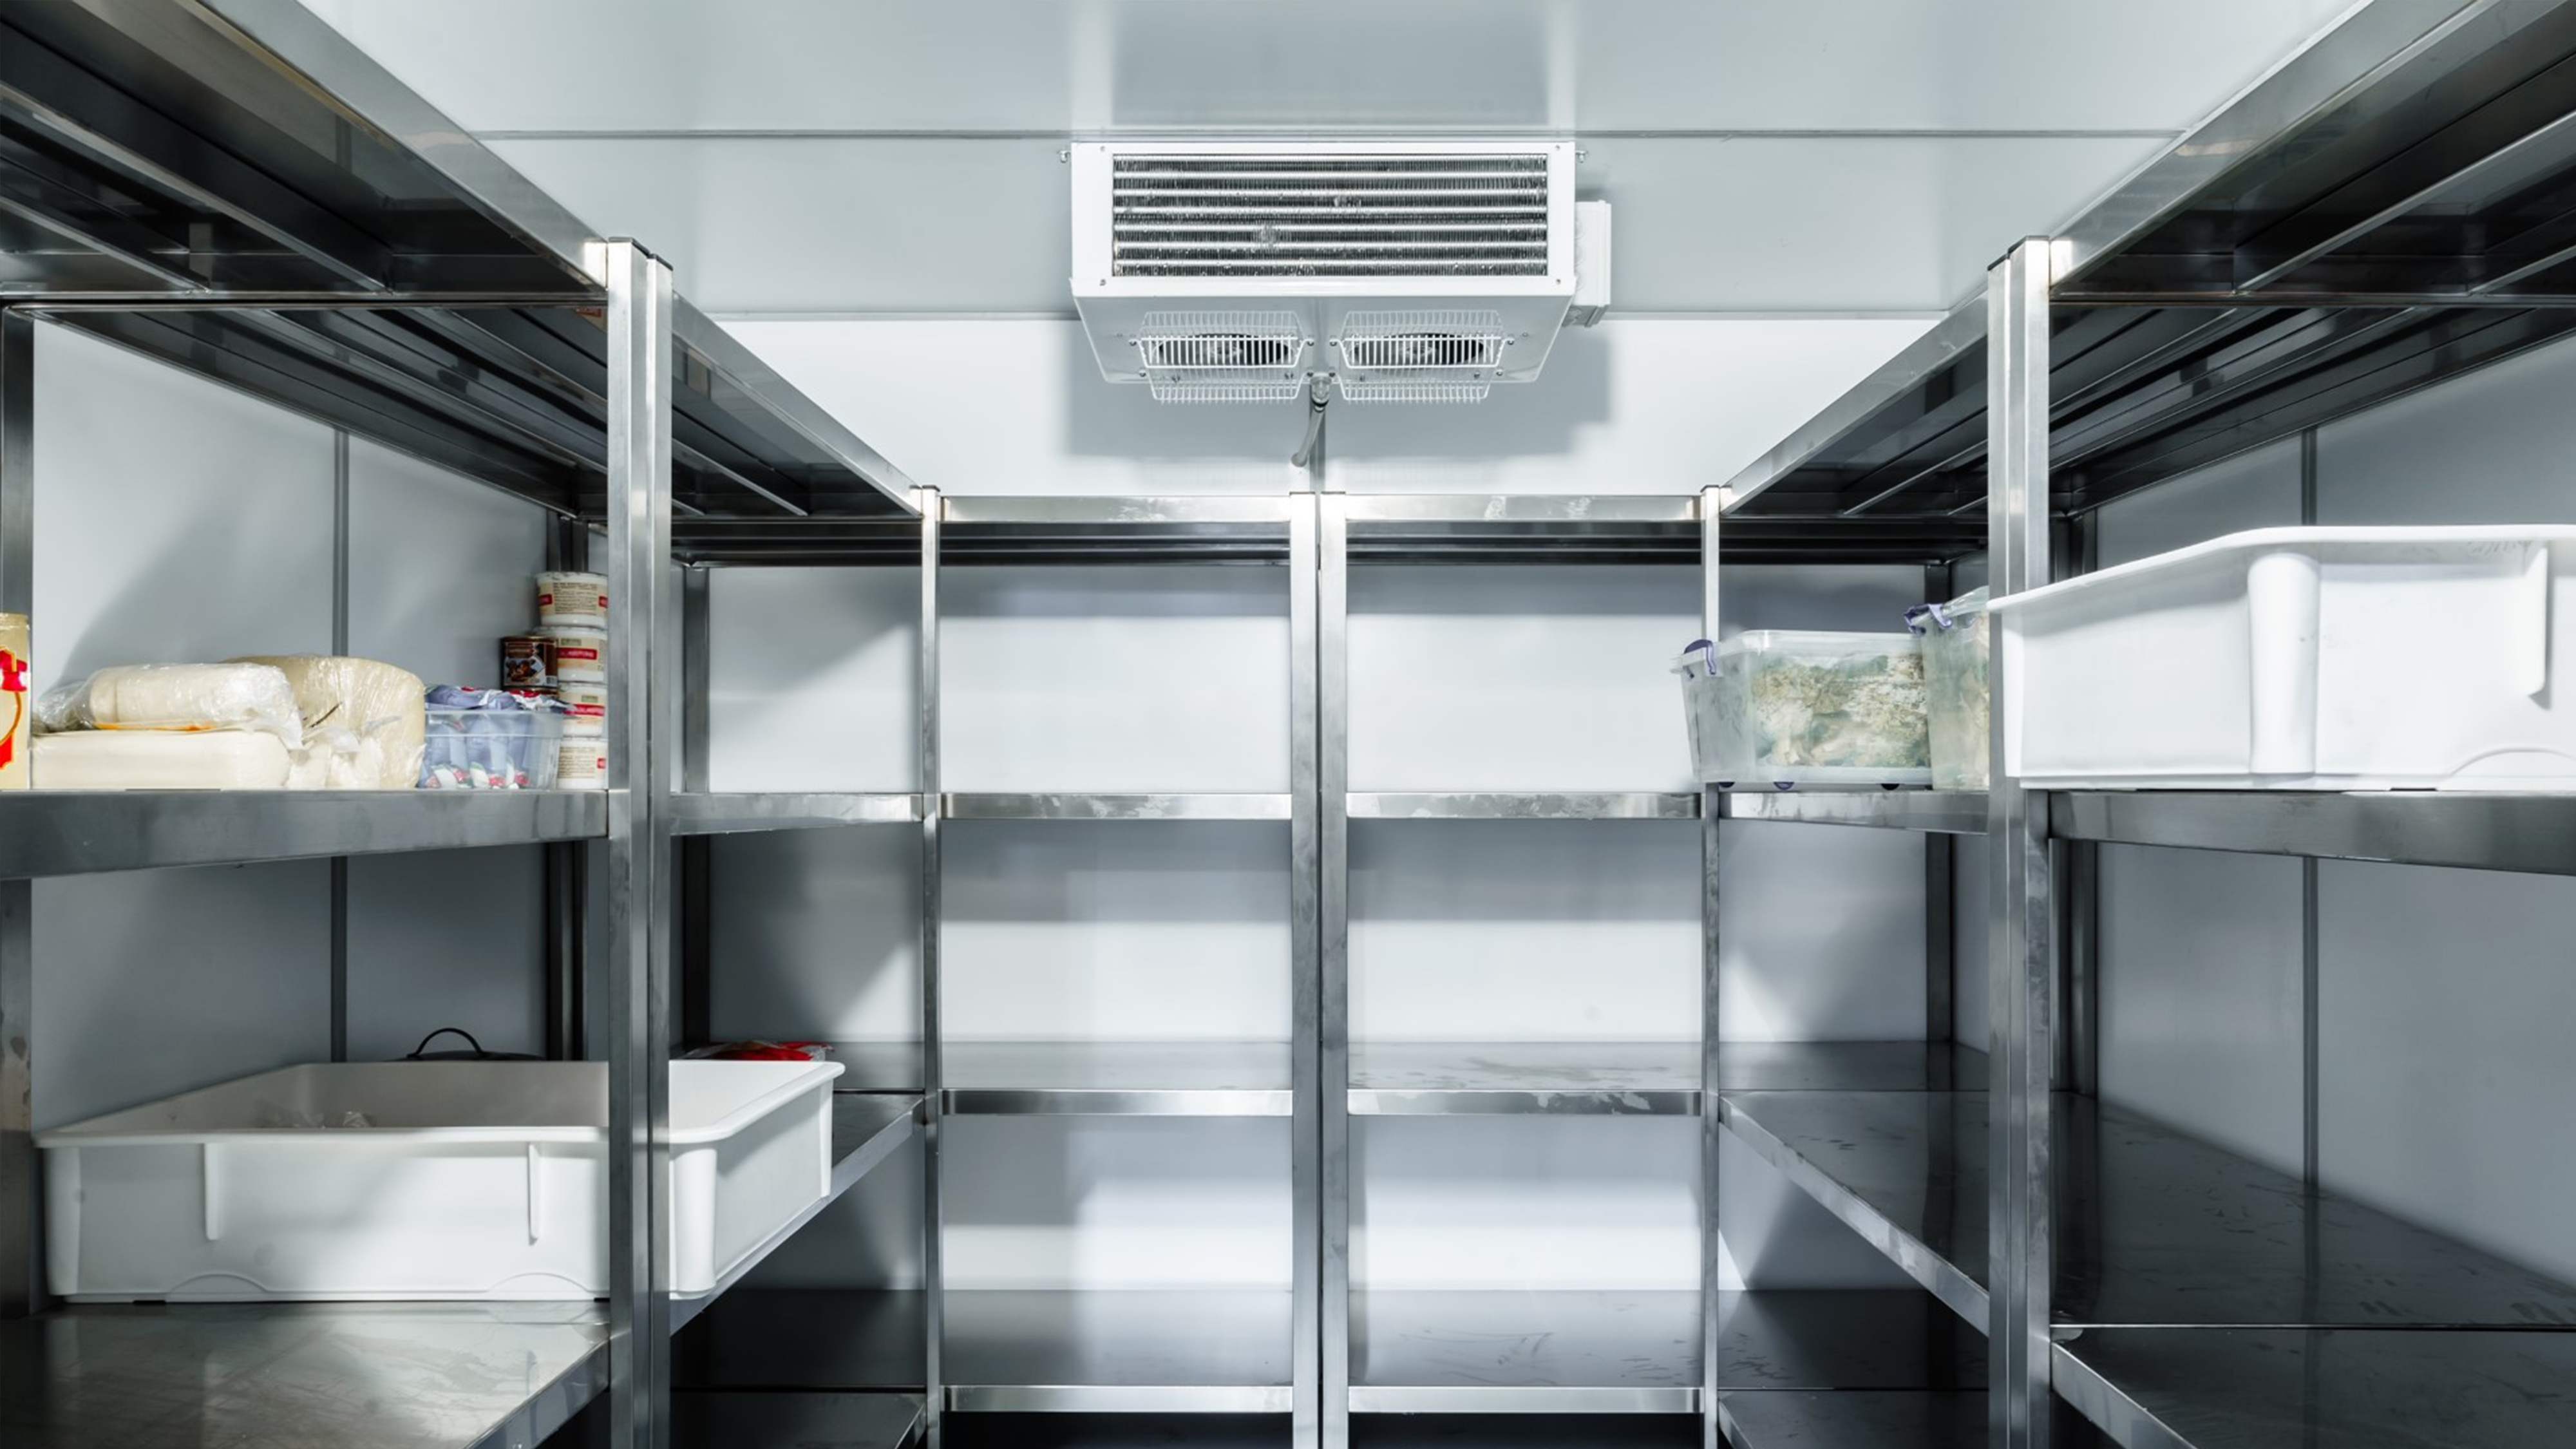 Bar & Restaurant Refrigeration Systems: Facts to Know